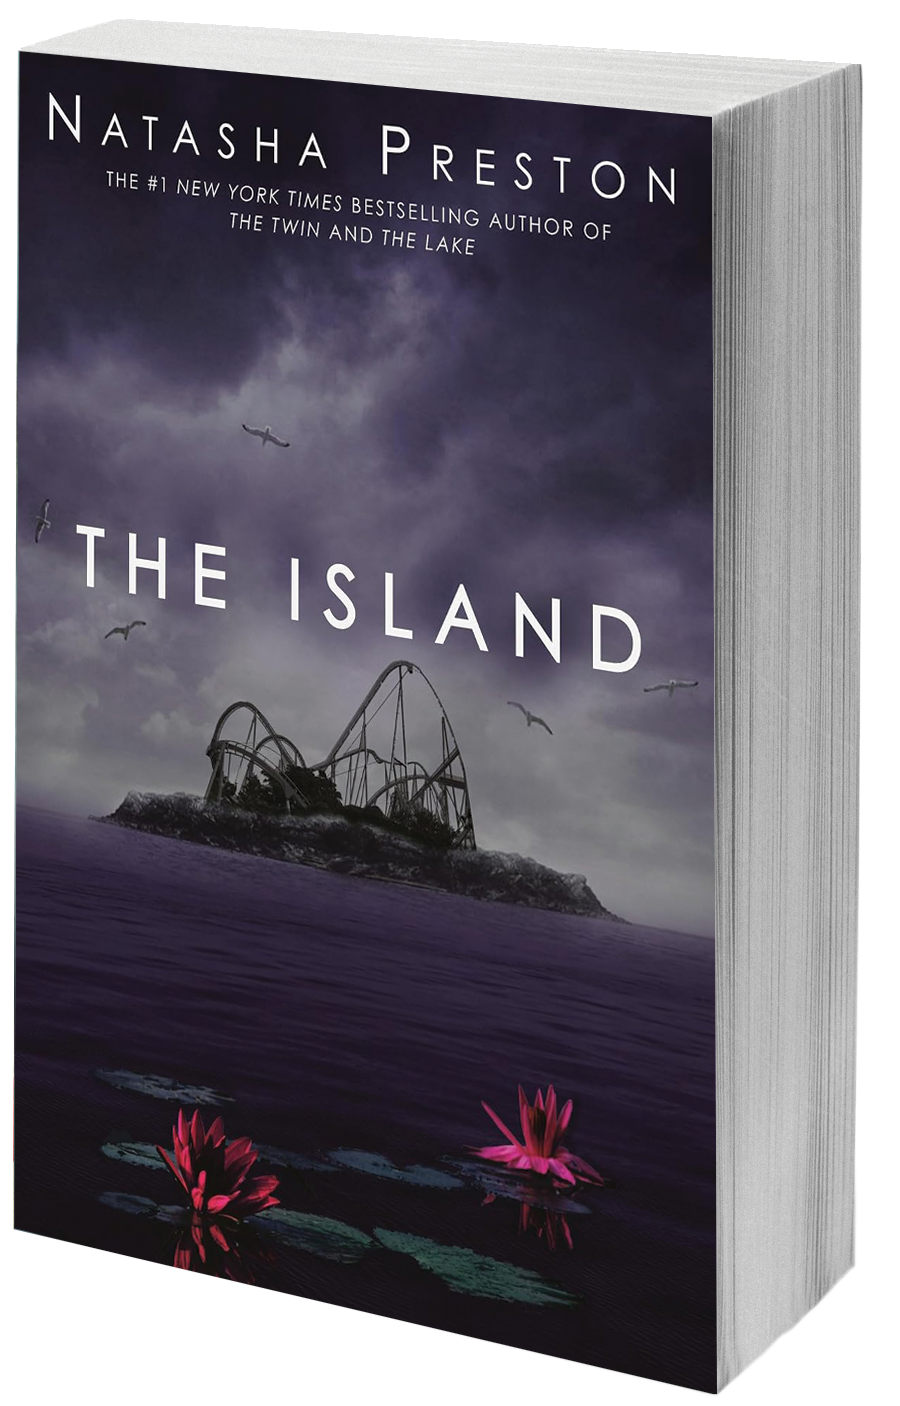 book cover - dark sea and island with roller coaster dominating